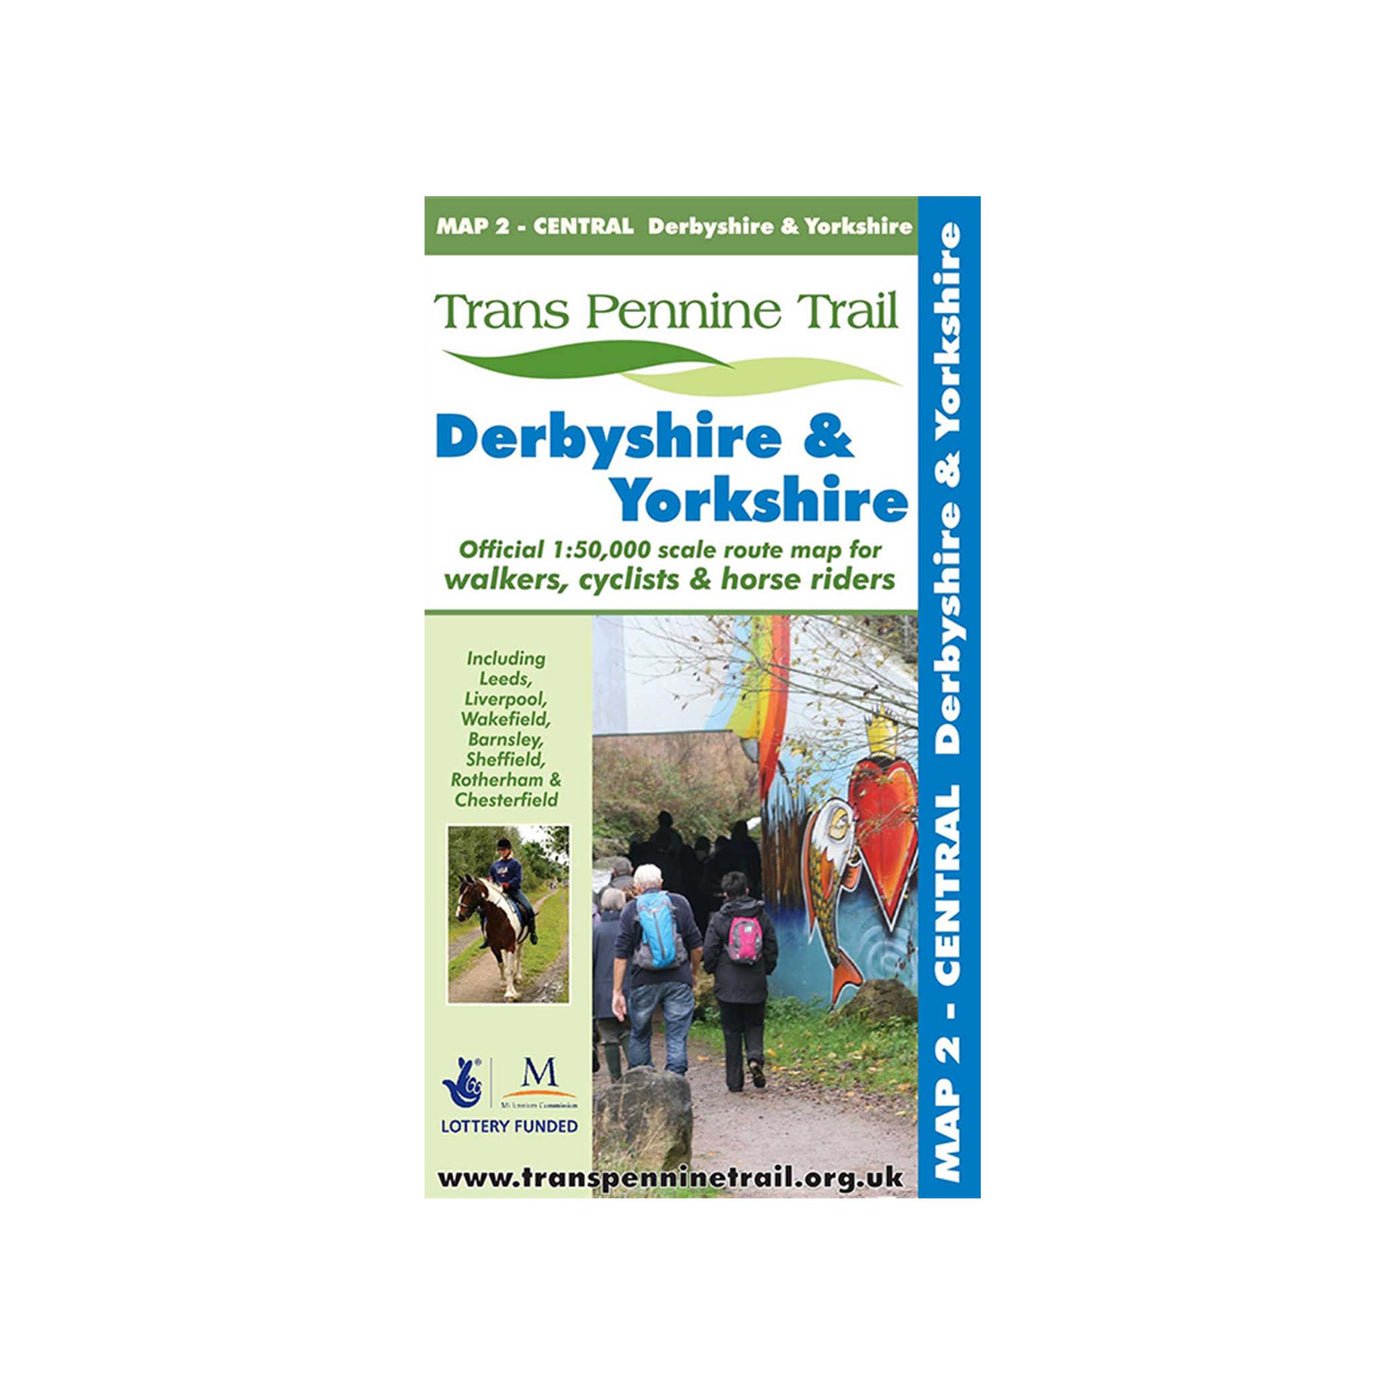 Trans Pennine Trail map 2 - Central Derbyshire & Yorkshire. Official cycle map for walkers, cyclists and horse riders. 